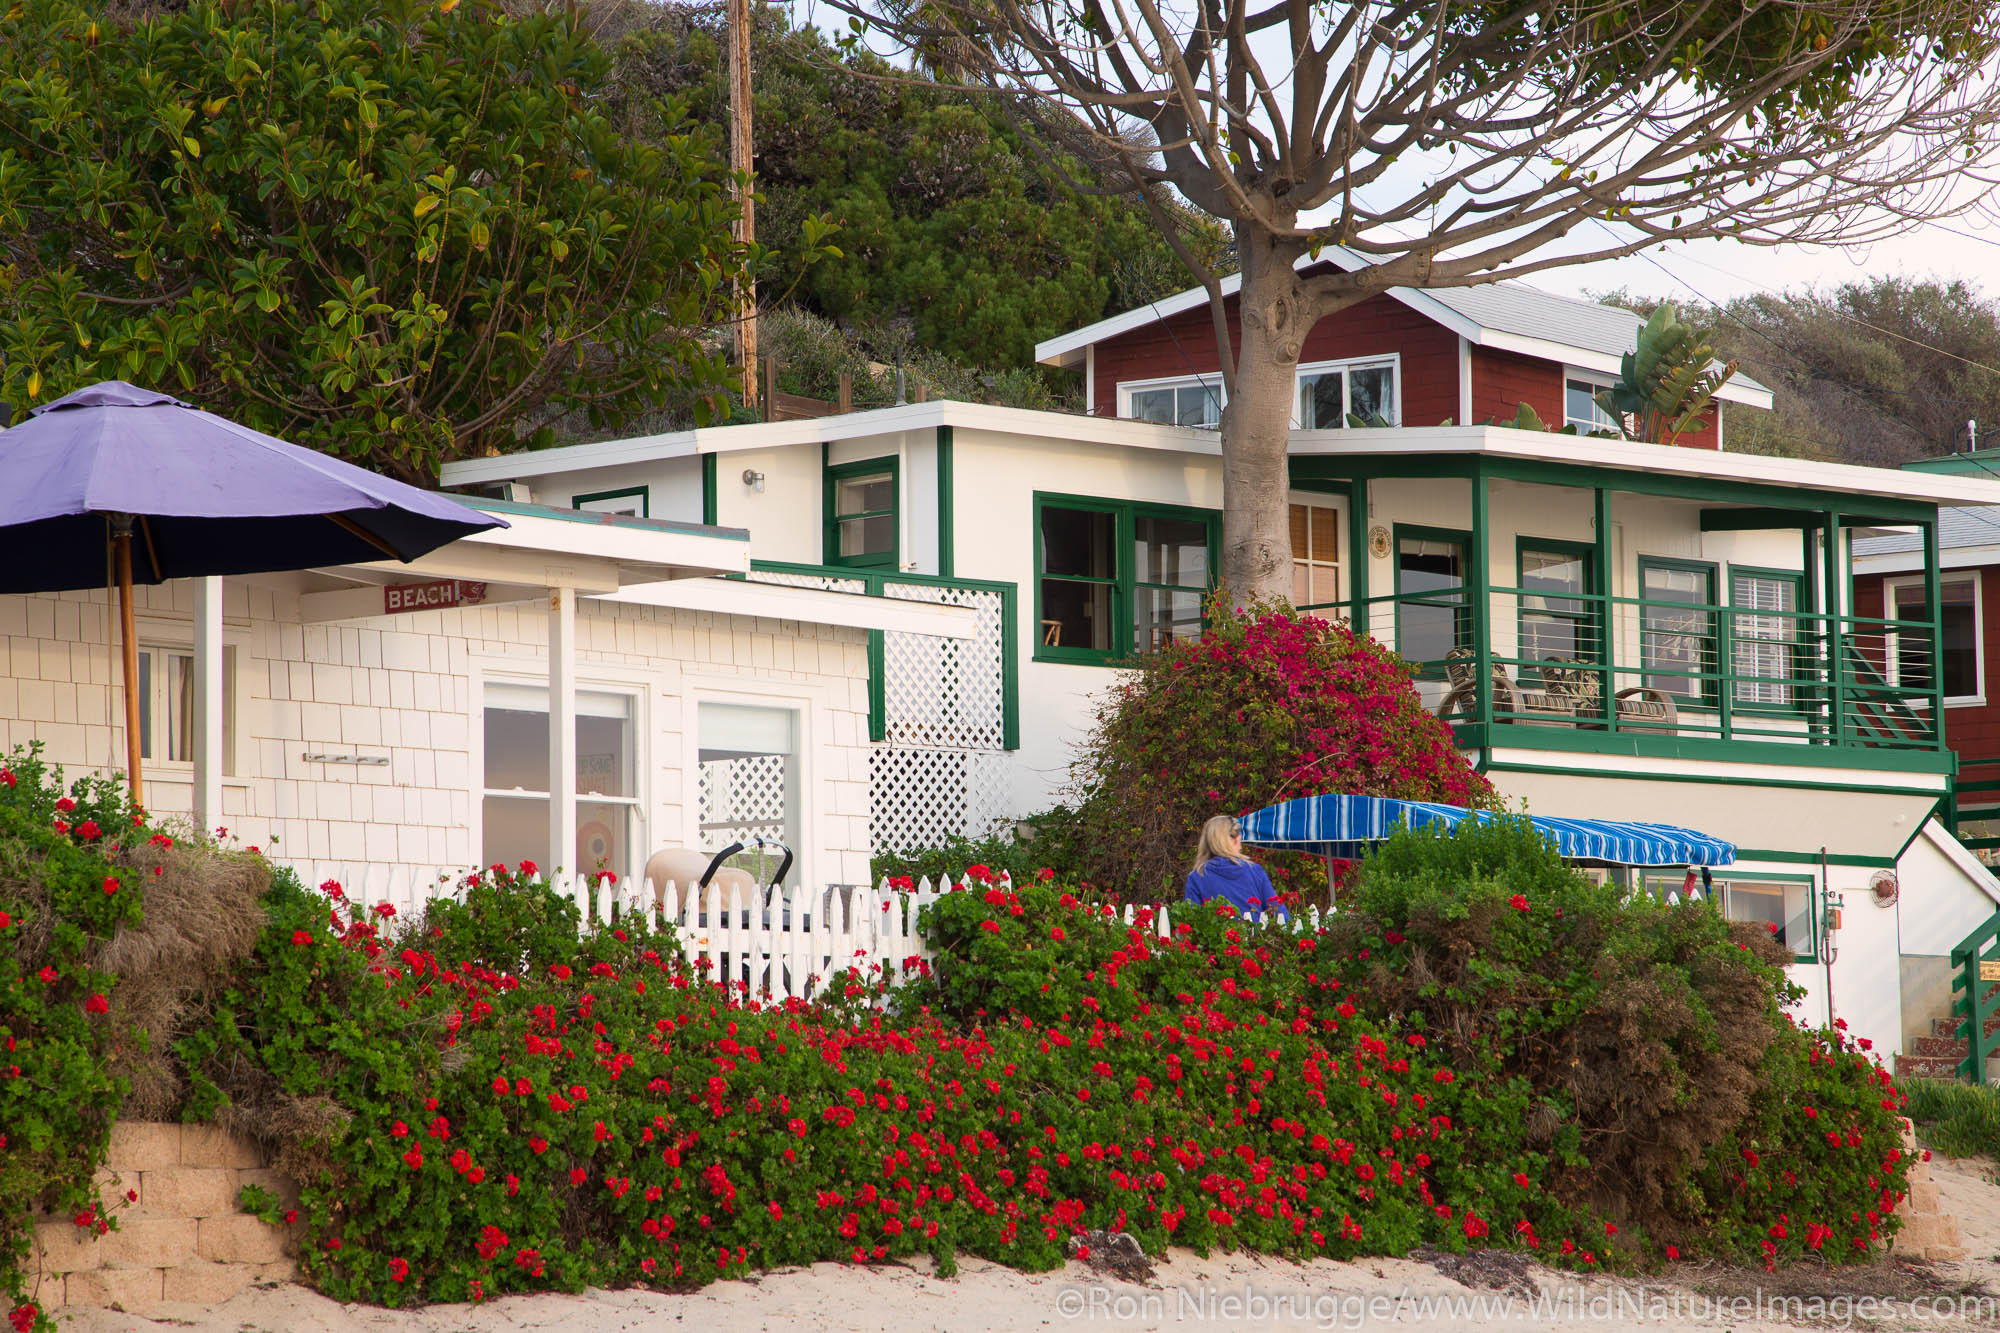 Crystal Cove Beach Cottages, Crystal Cove State Park, Newport Beach, Orange County, California.